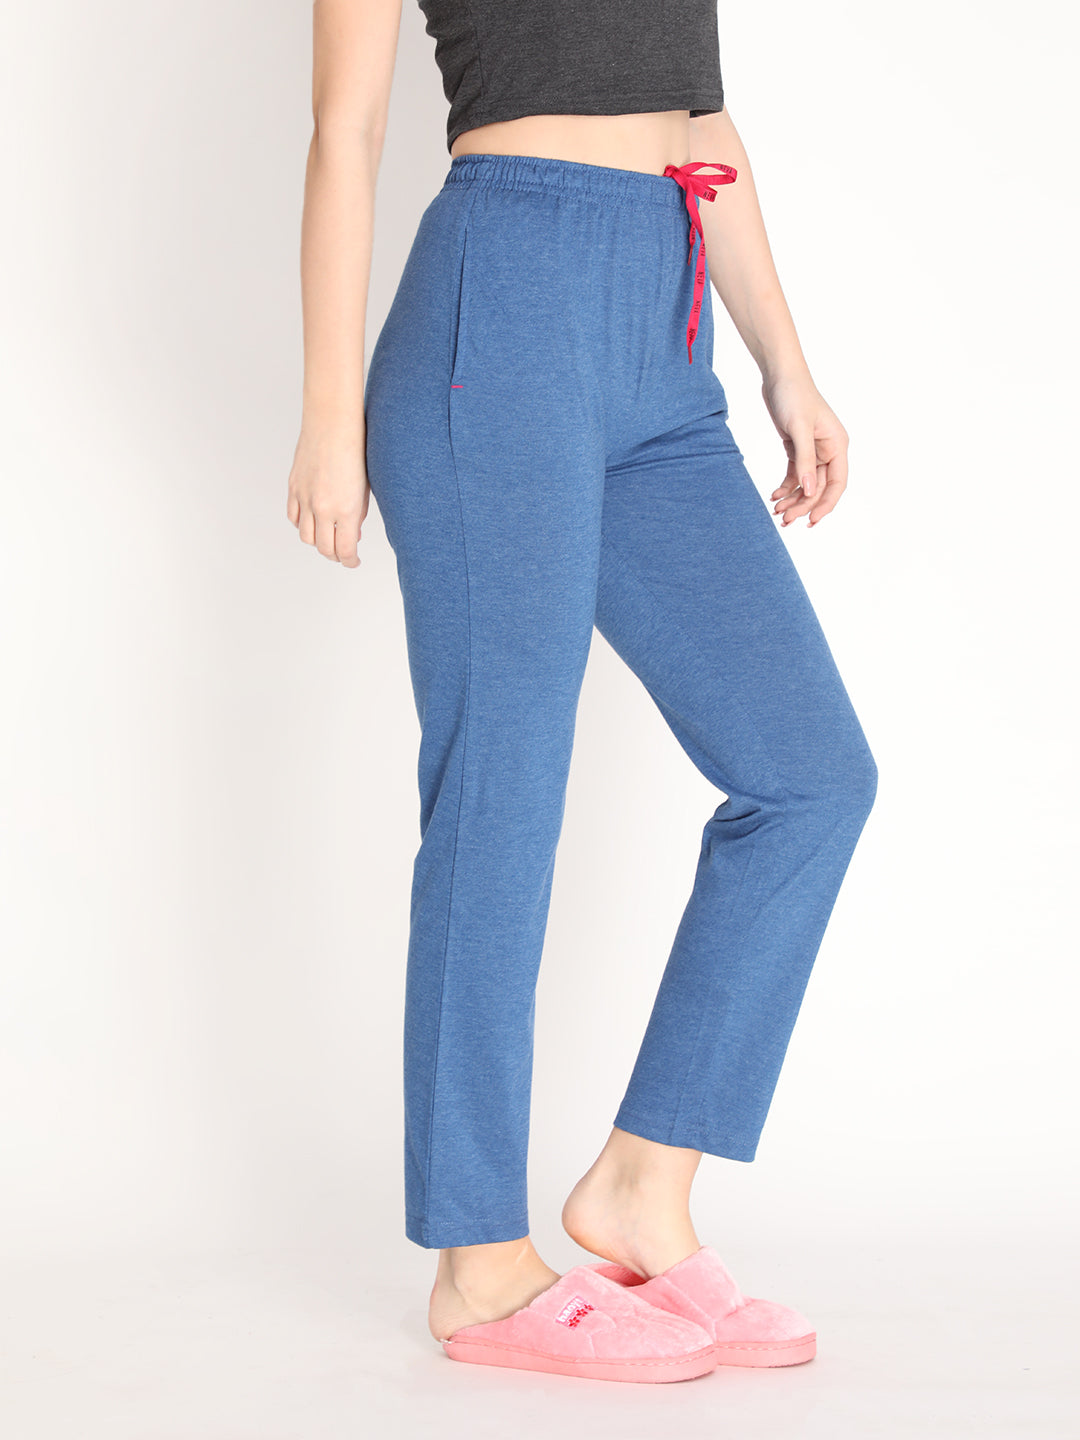 Cotton Trousers For Women - Buy Cotton Trousers For Women online in India